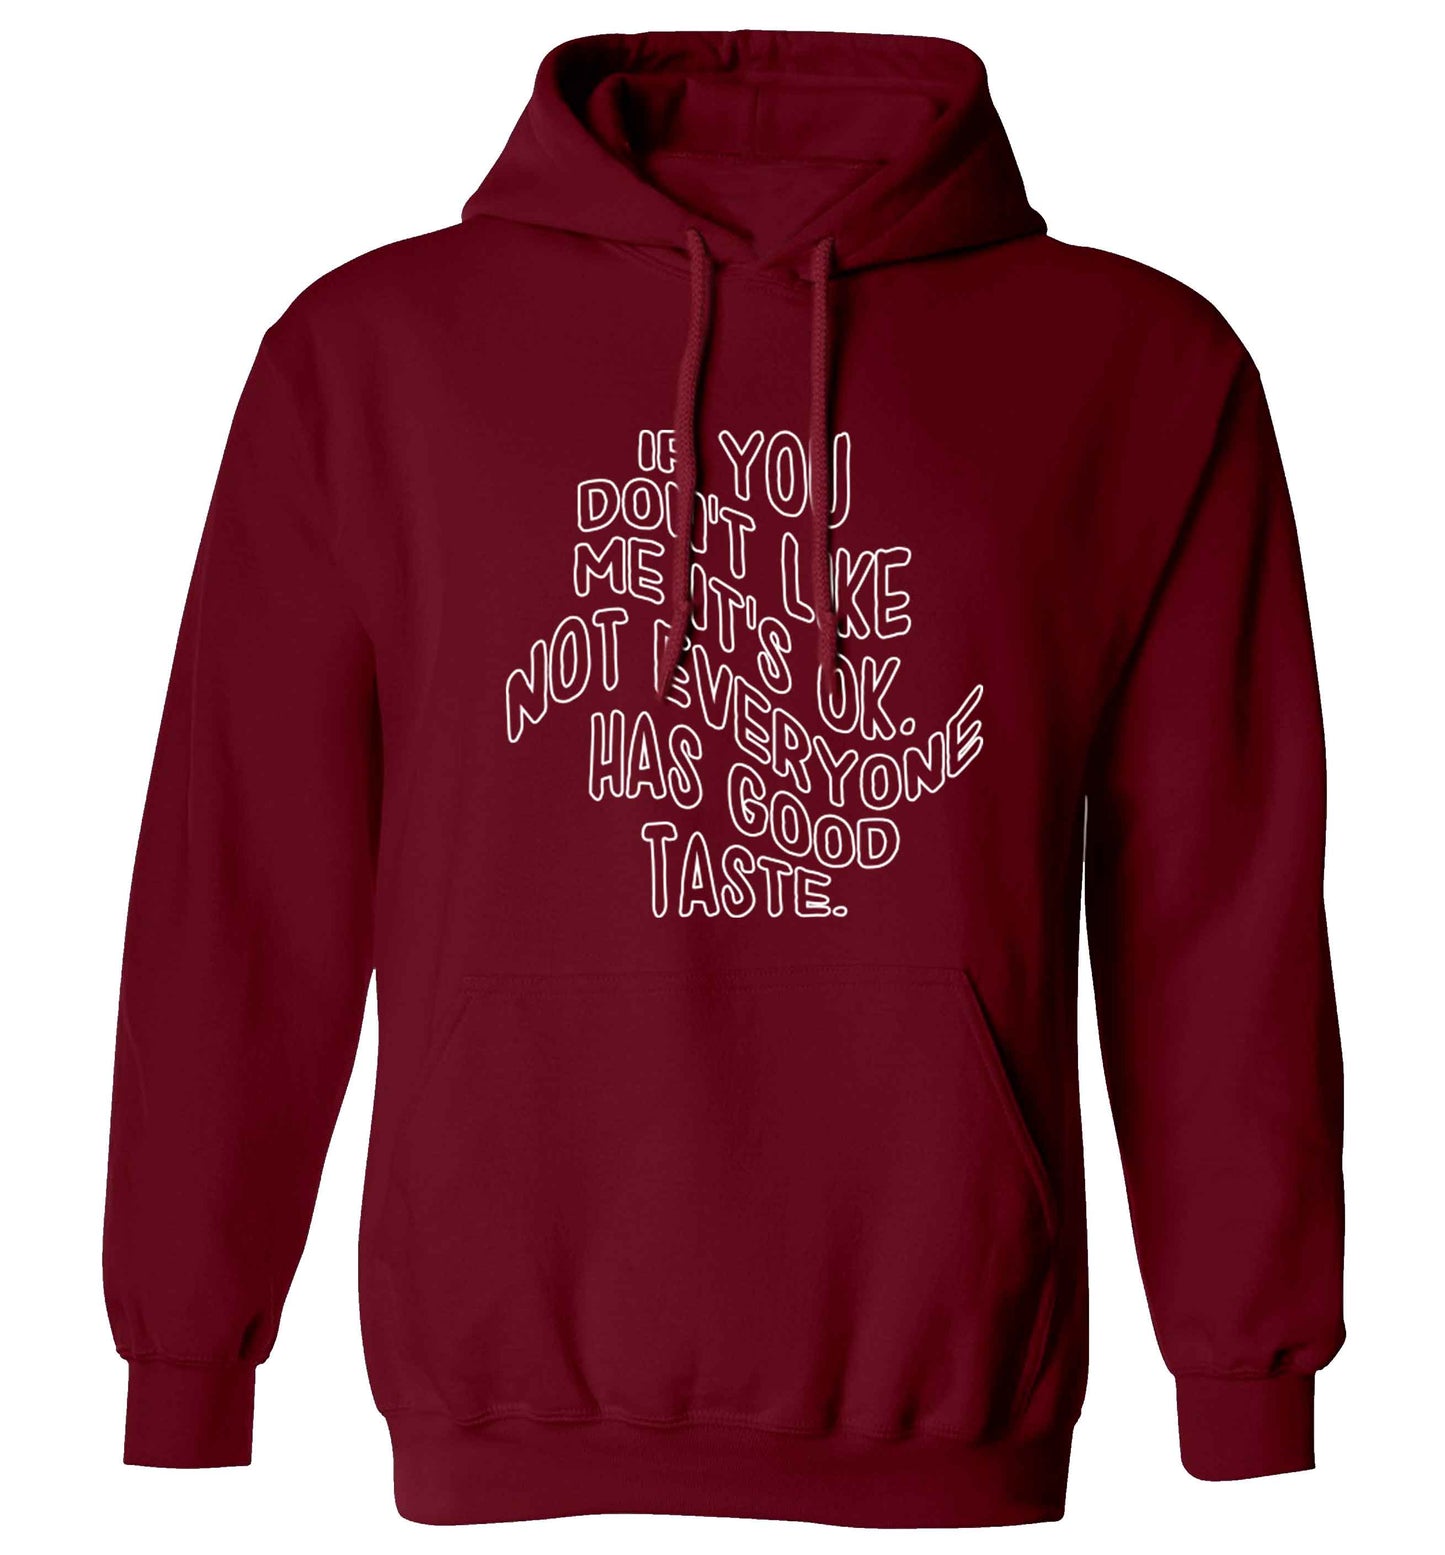 If you don't like me it's ok not everyone has good taste adults unisex maroon hoodie 2XL